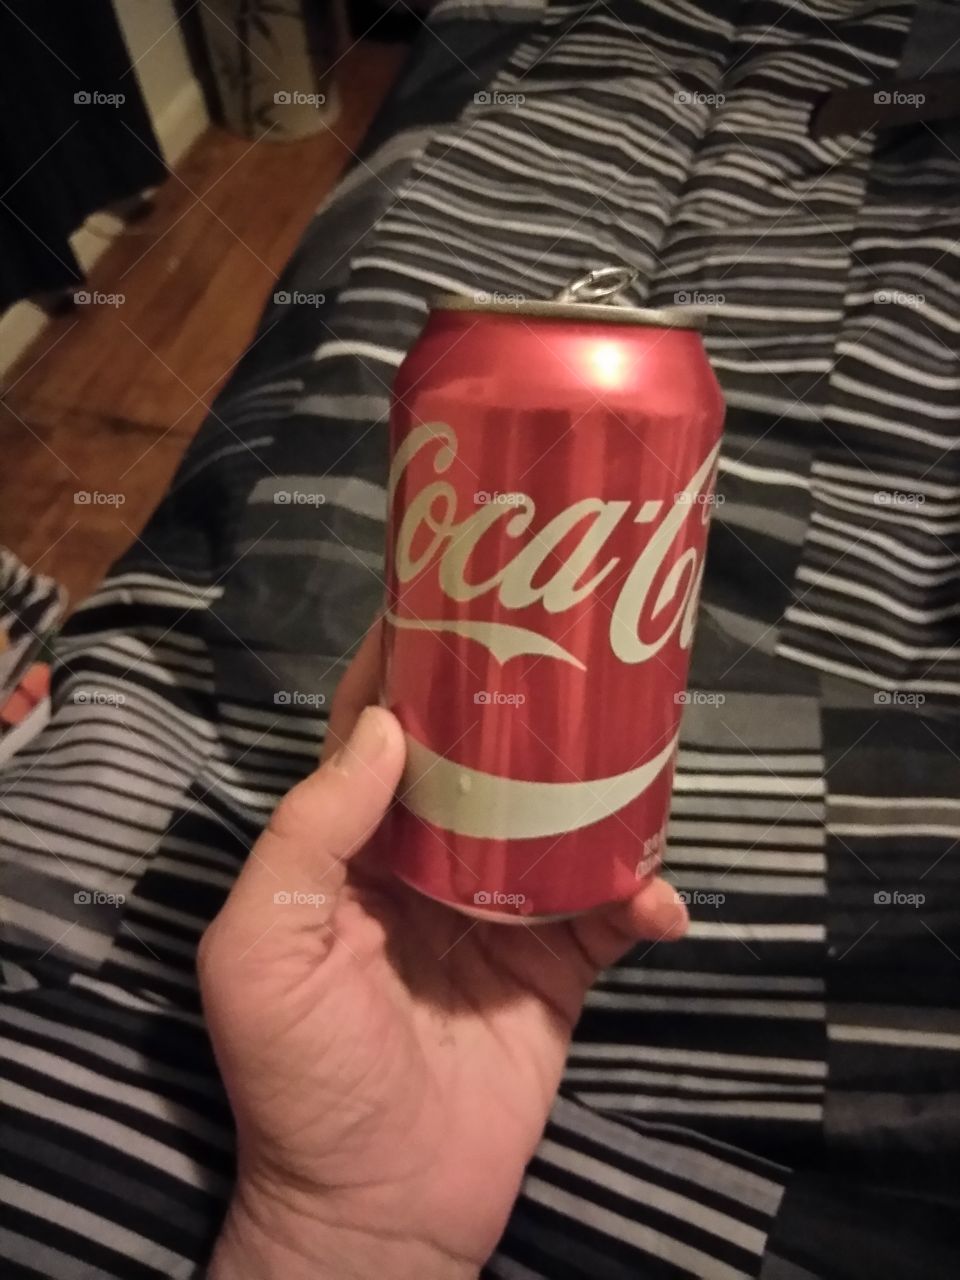 coke if the day